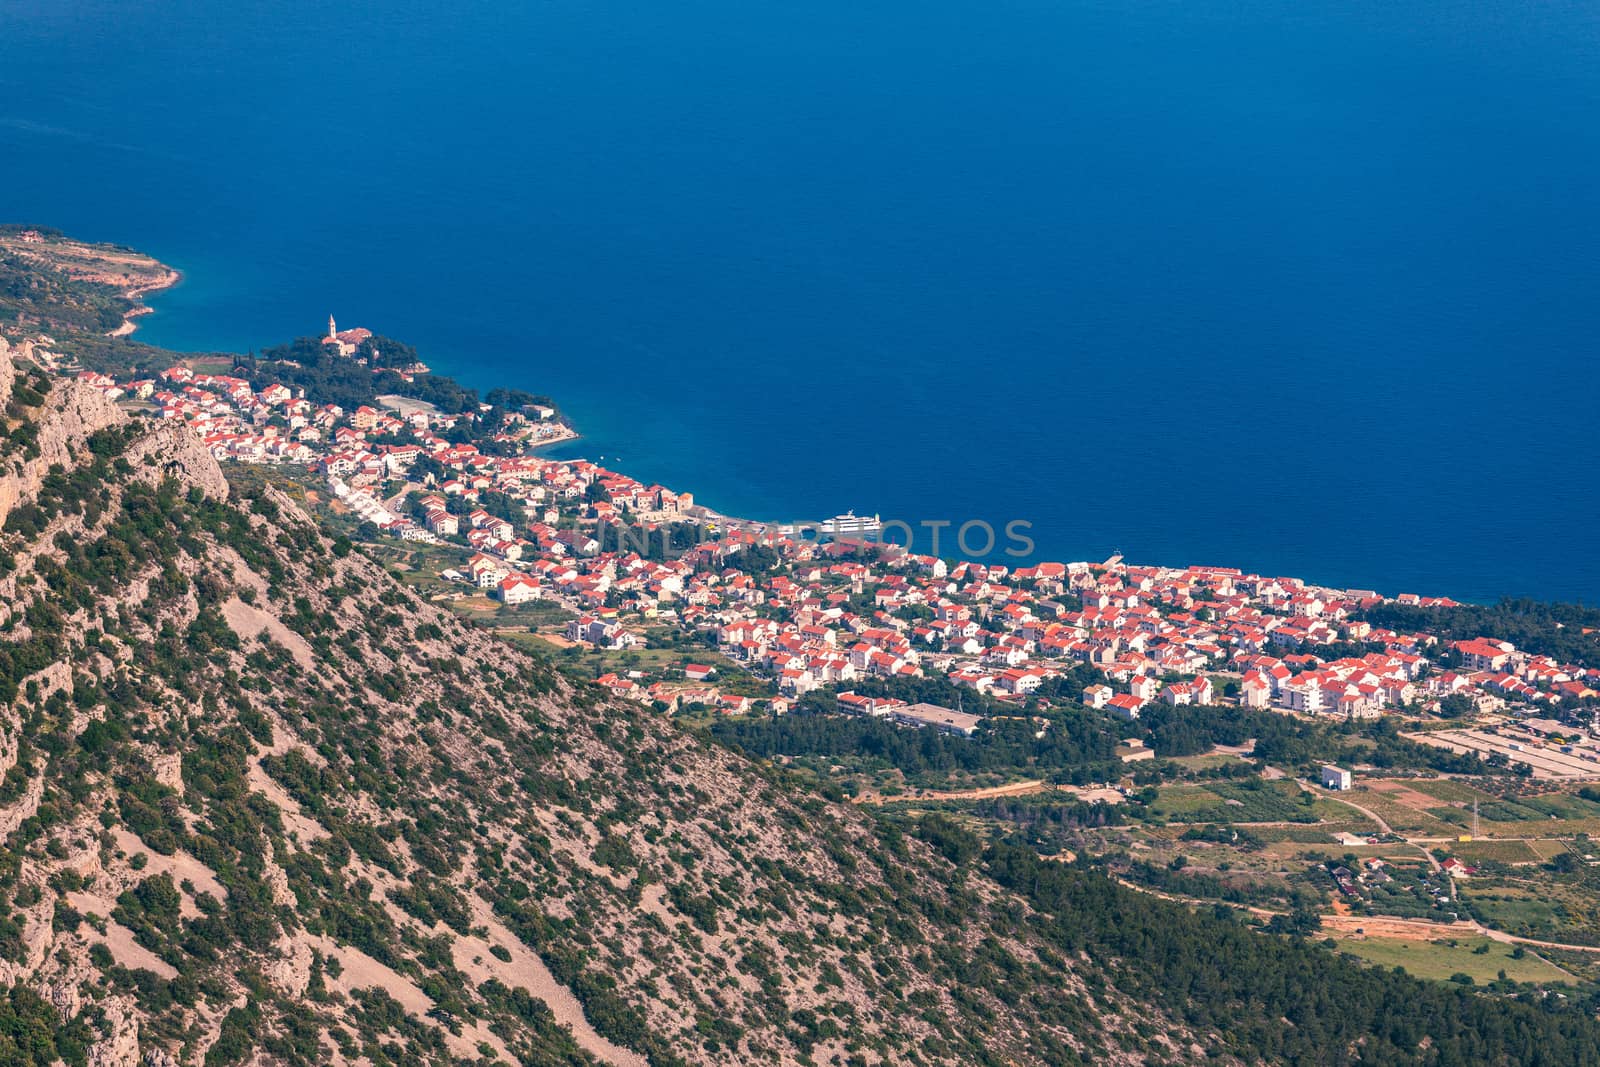 View on mountains and sea from Vidova Gora on Brac island. View from the mountain Vidova Gora on the island Brac in Croatia with the famous landmark Zlatni Rat near the city of Bol an the blue sea.